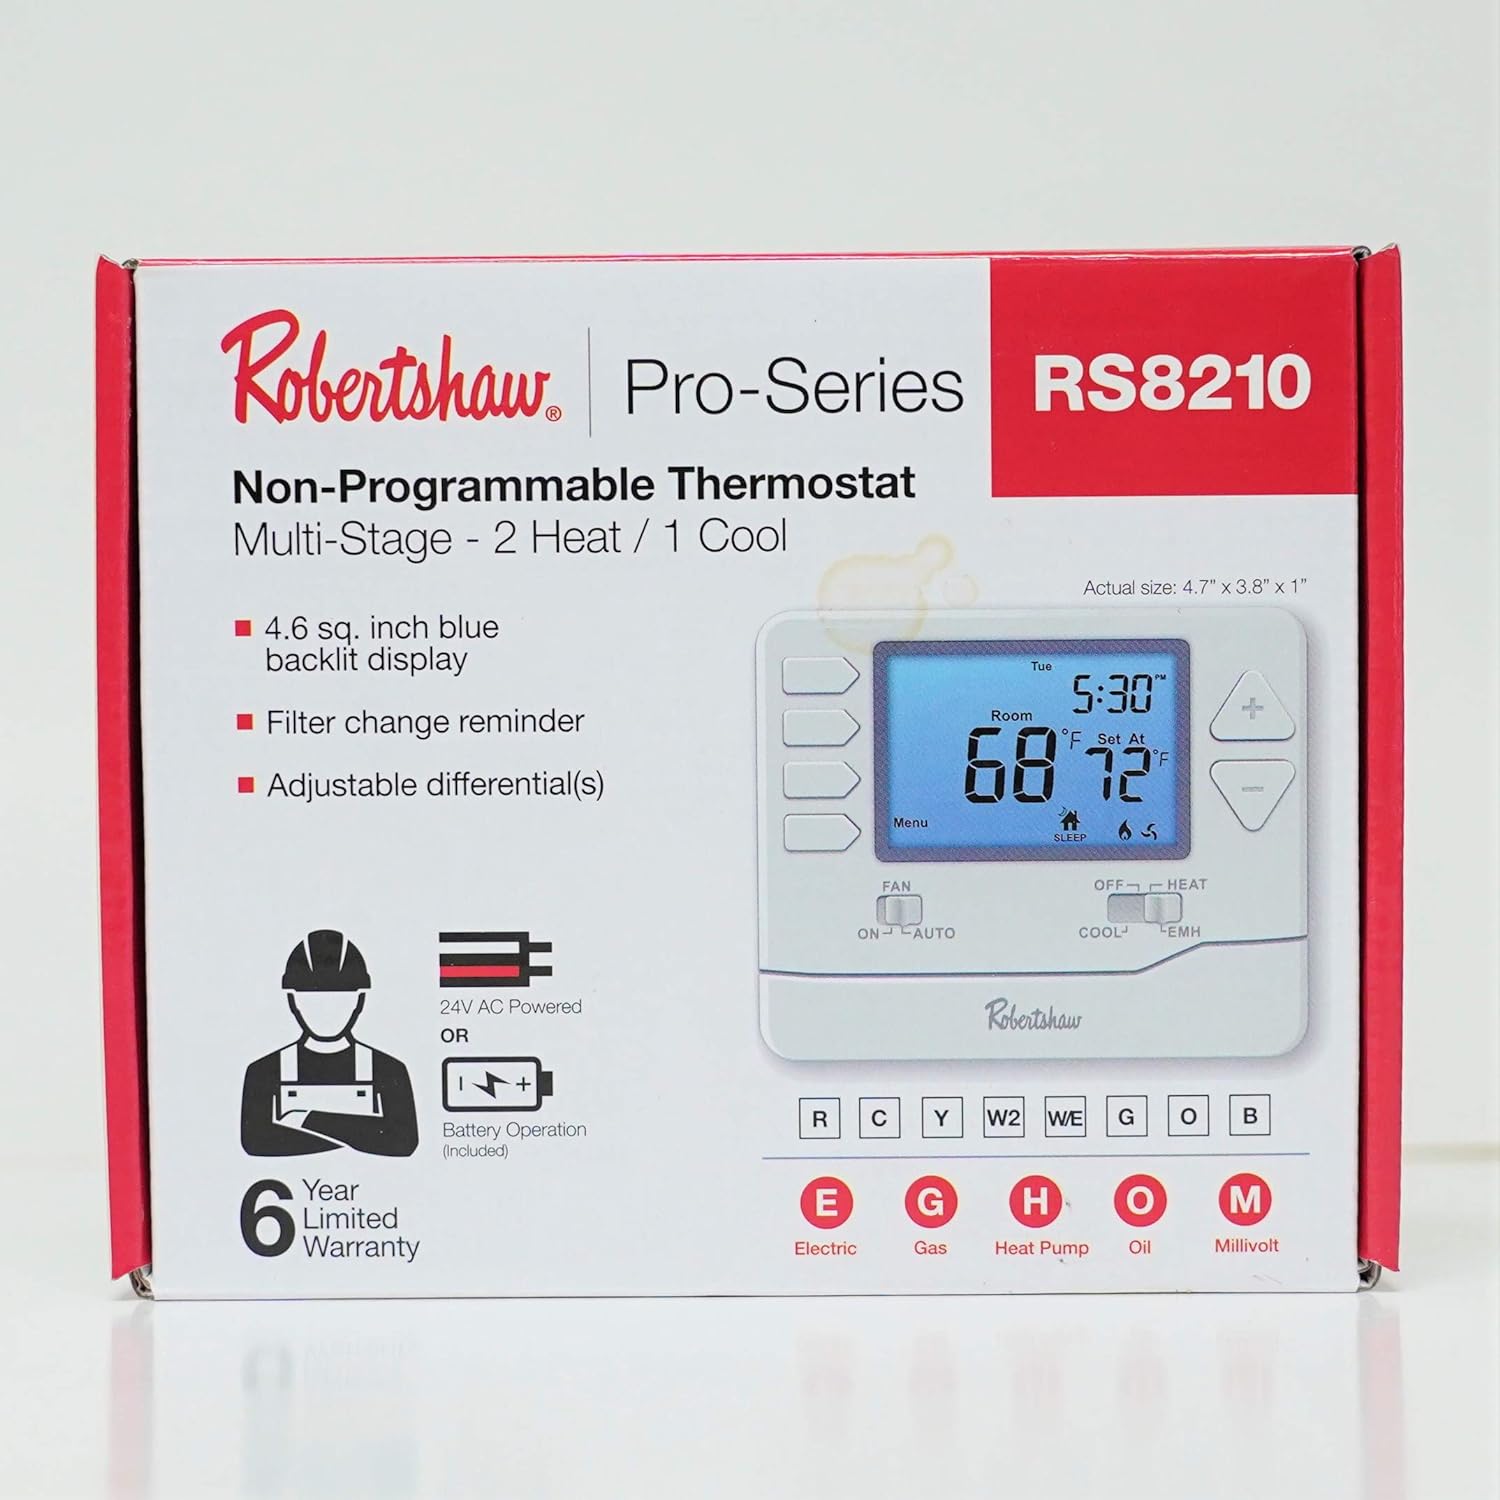 Robertshaw RS8210 Pro Series Non-Programmable Thermostat, Multi-Stage, 2 Heat / 1 Cool